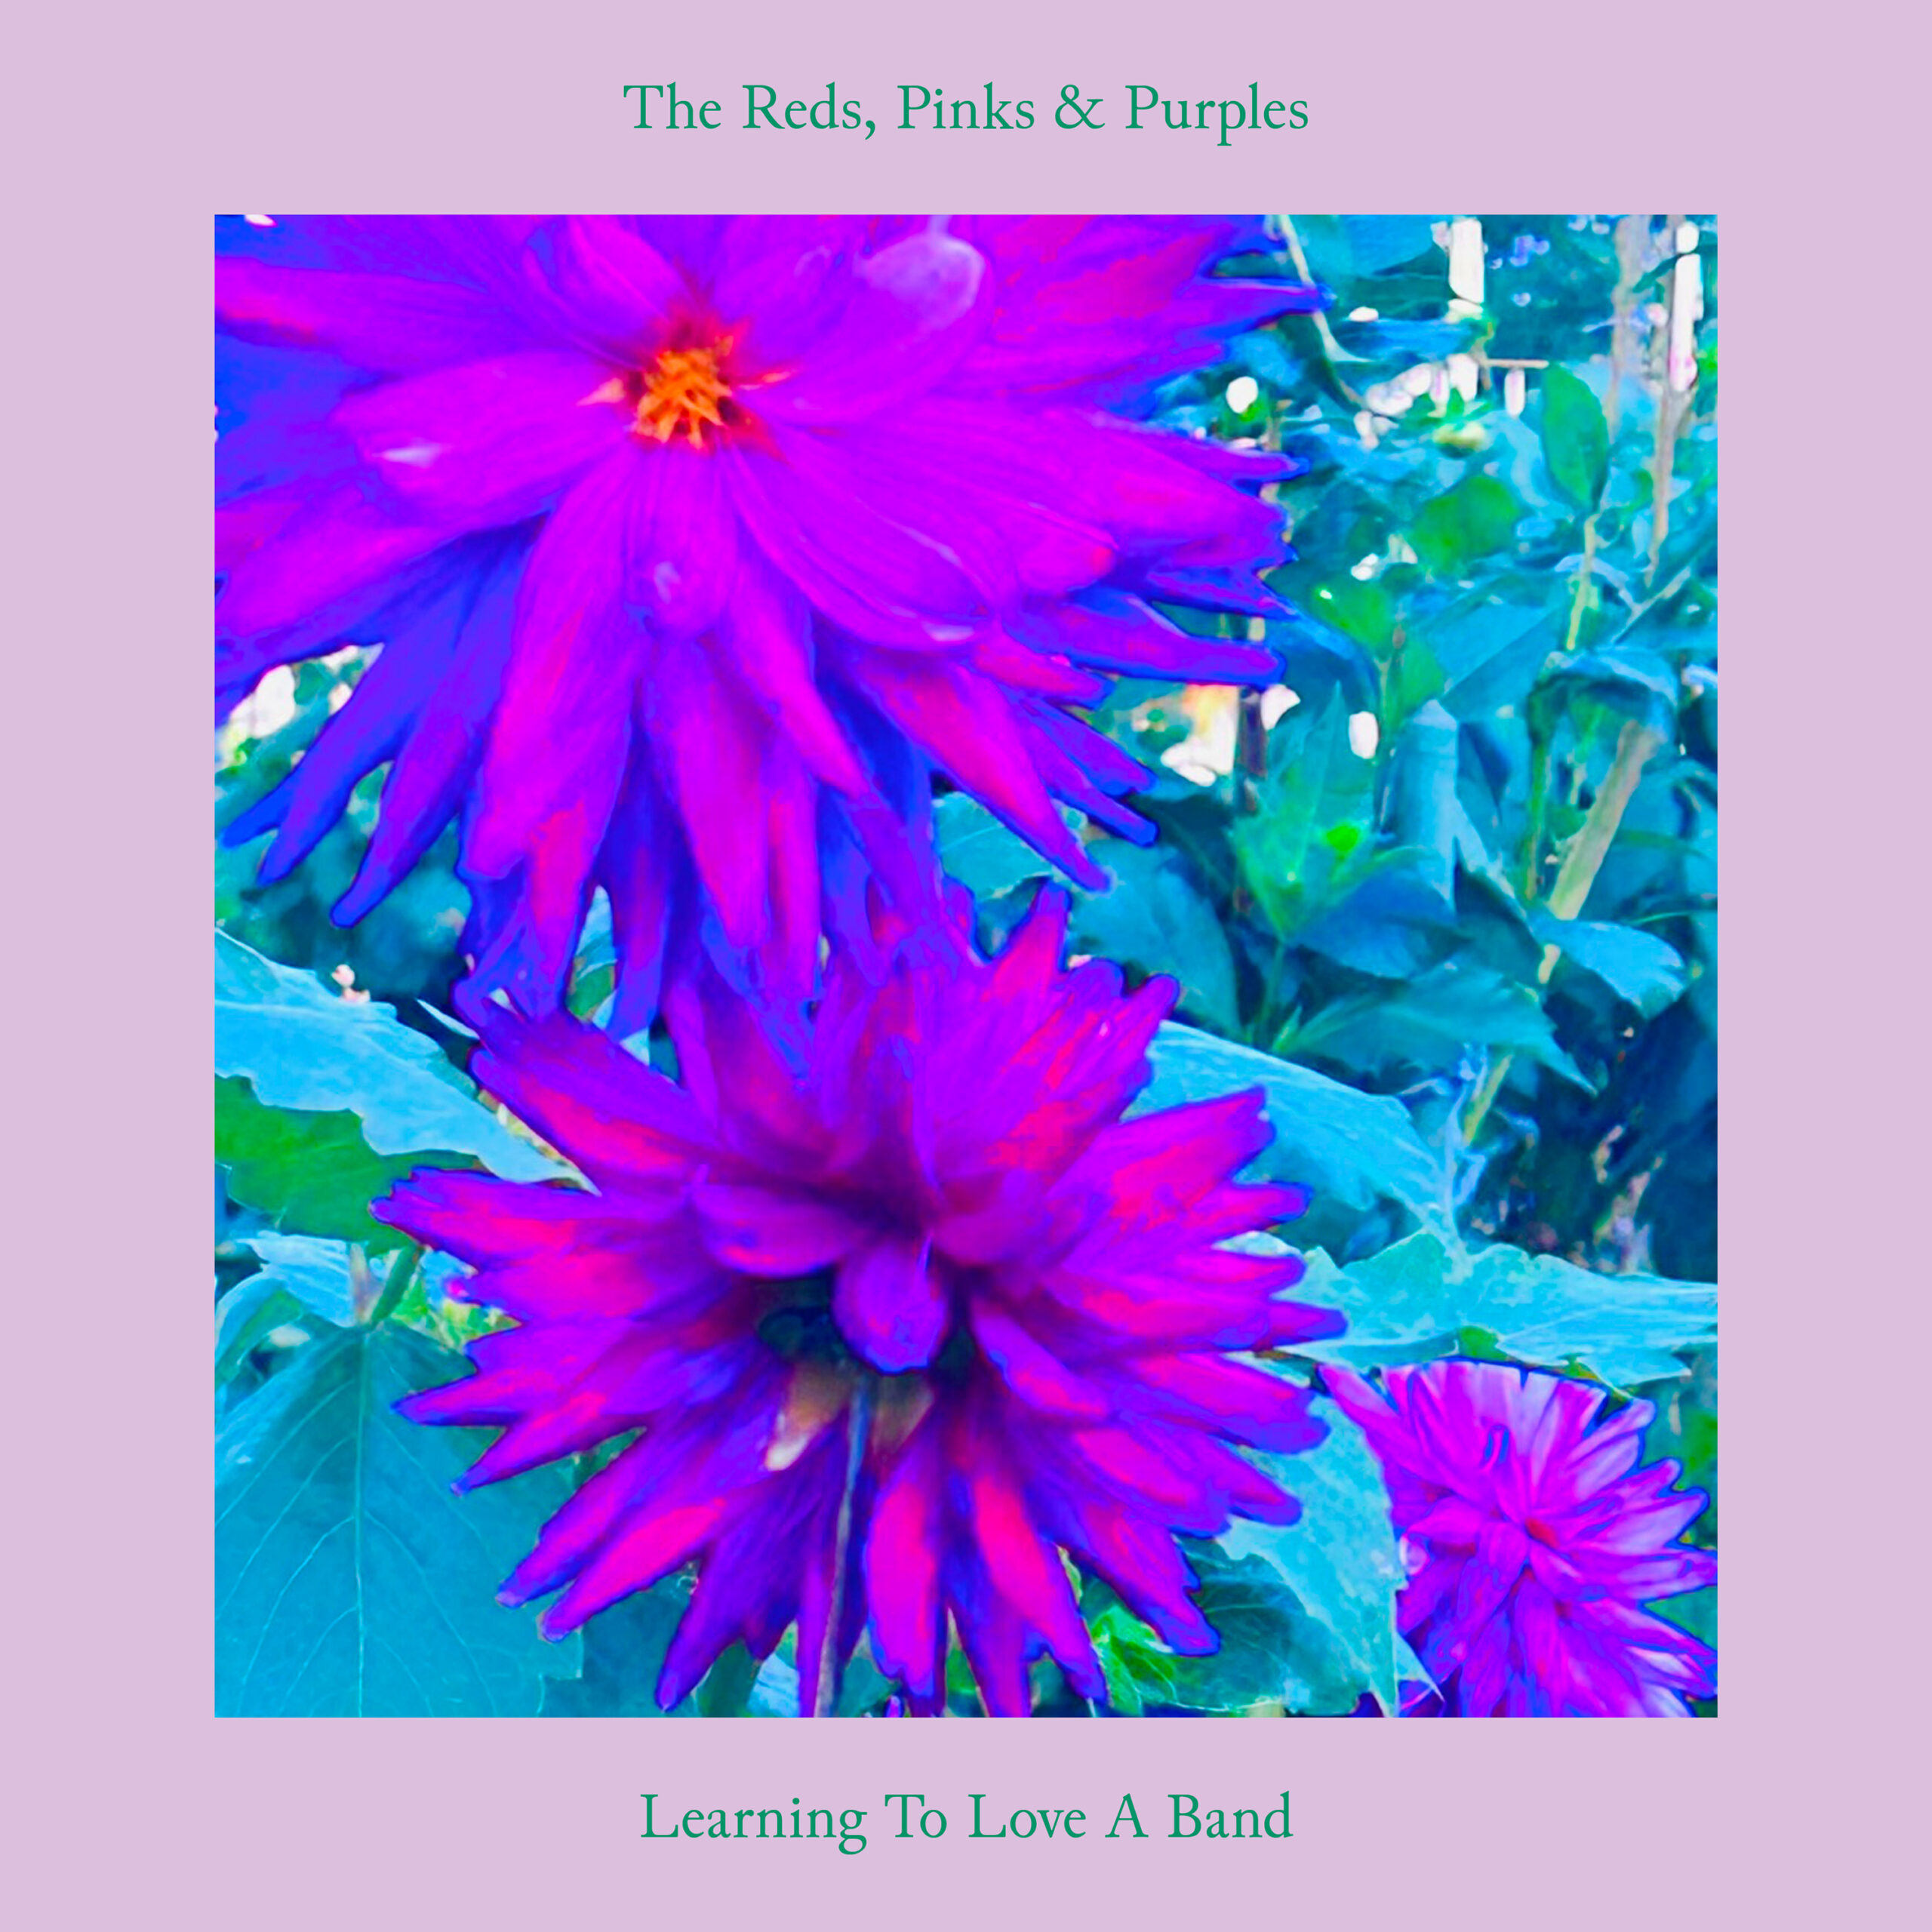 The Reds, Pinks & Purples shares new single “Learning To Love A Band”